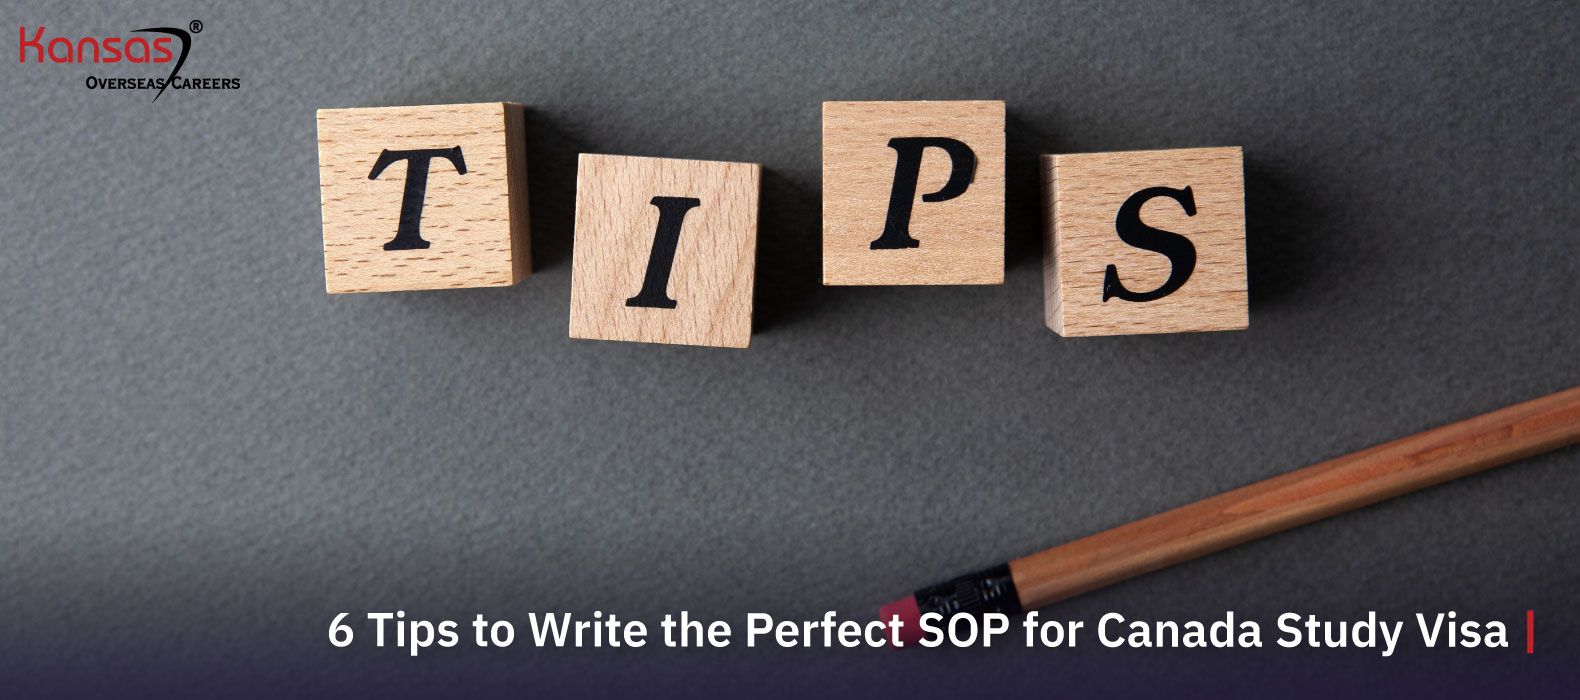 6-Tips-to-Write-the-Perfect-SOP-for-Canada-Study-Visa